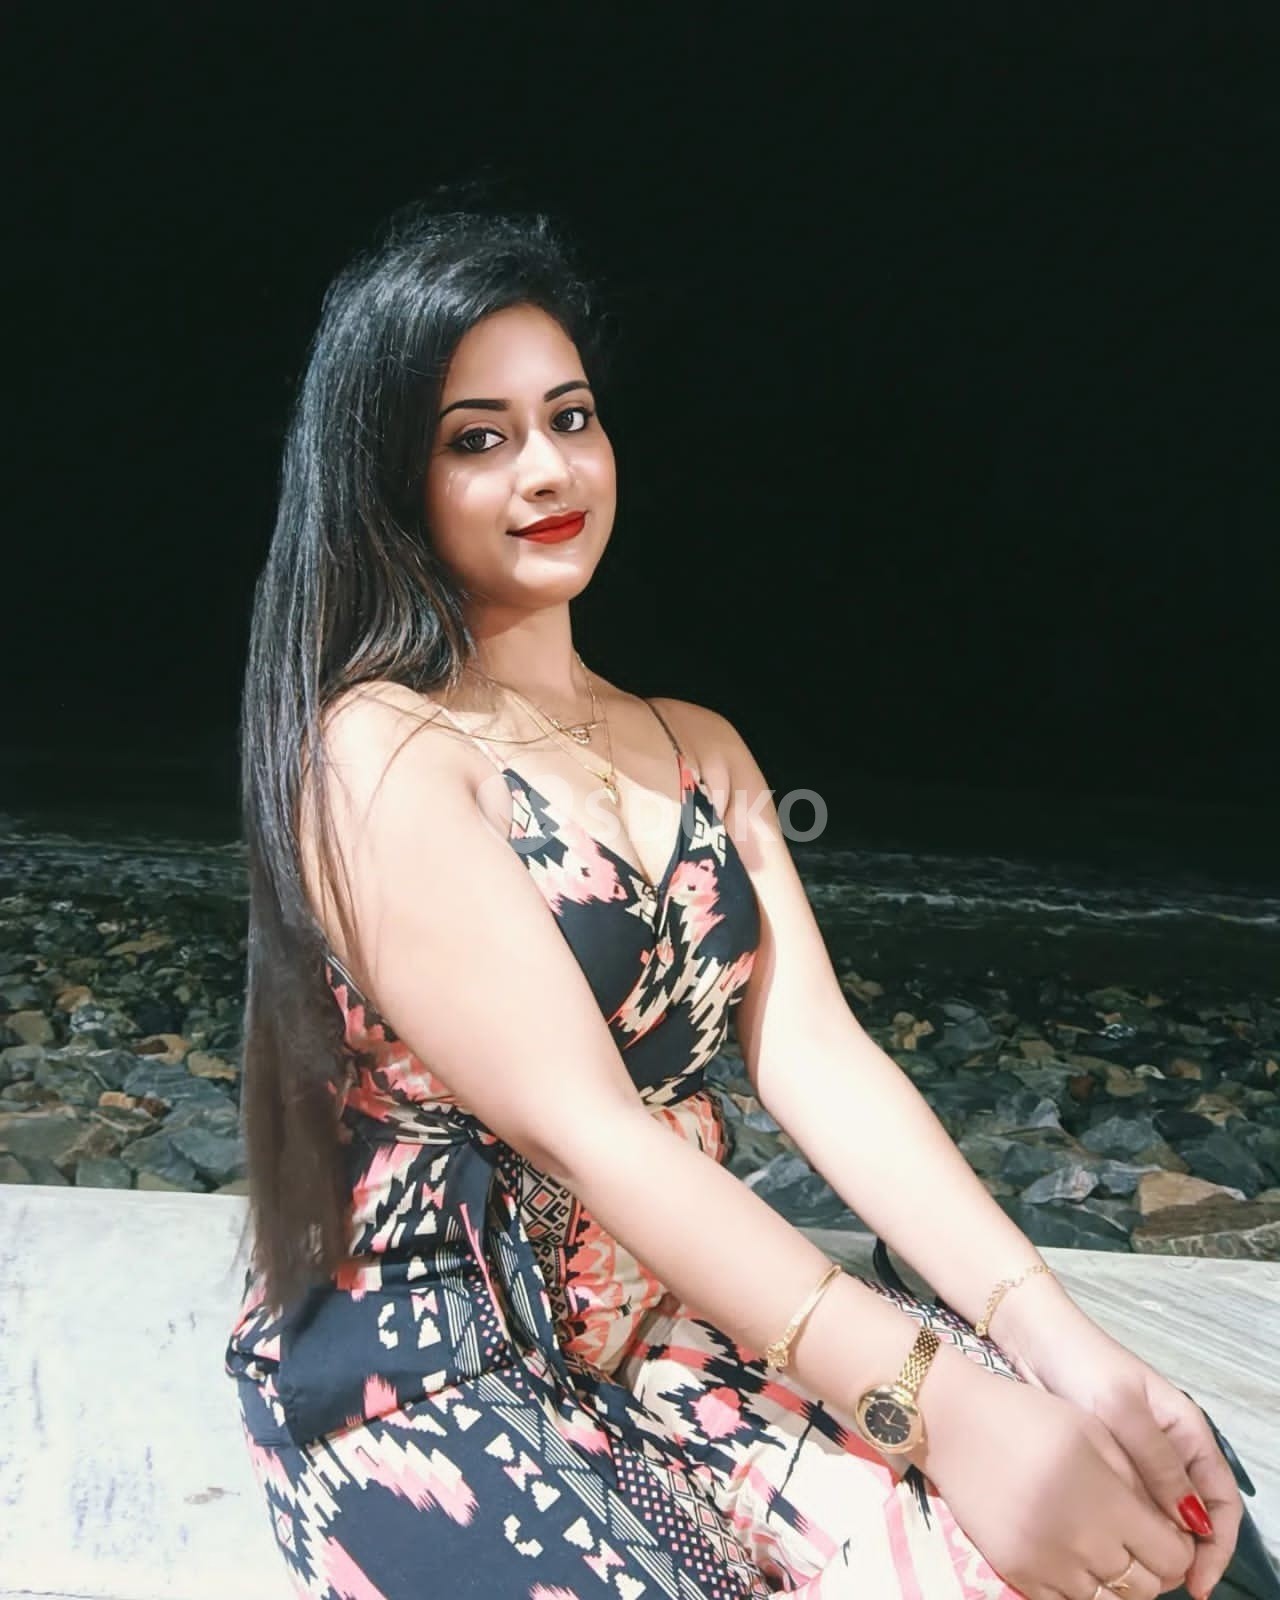 Gandhinagar full satisfied call girl s.ervice 24 hours available.